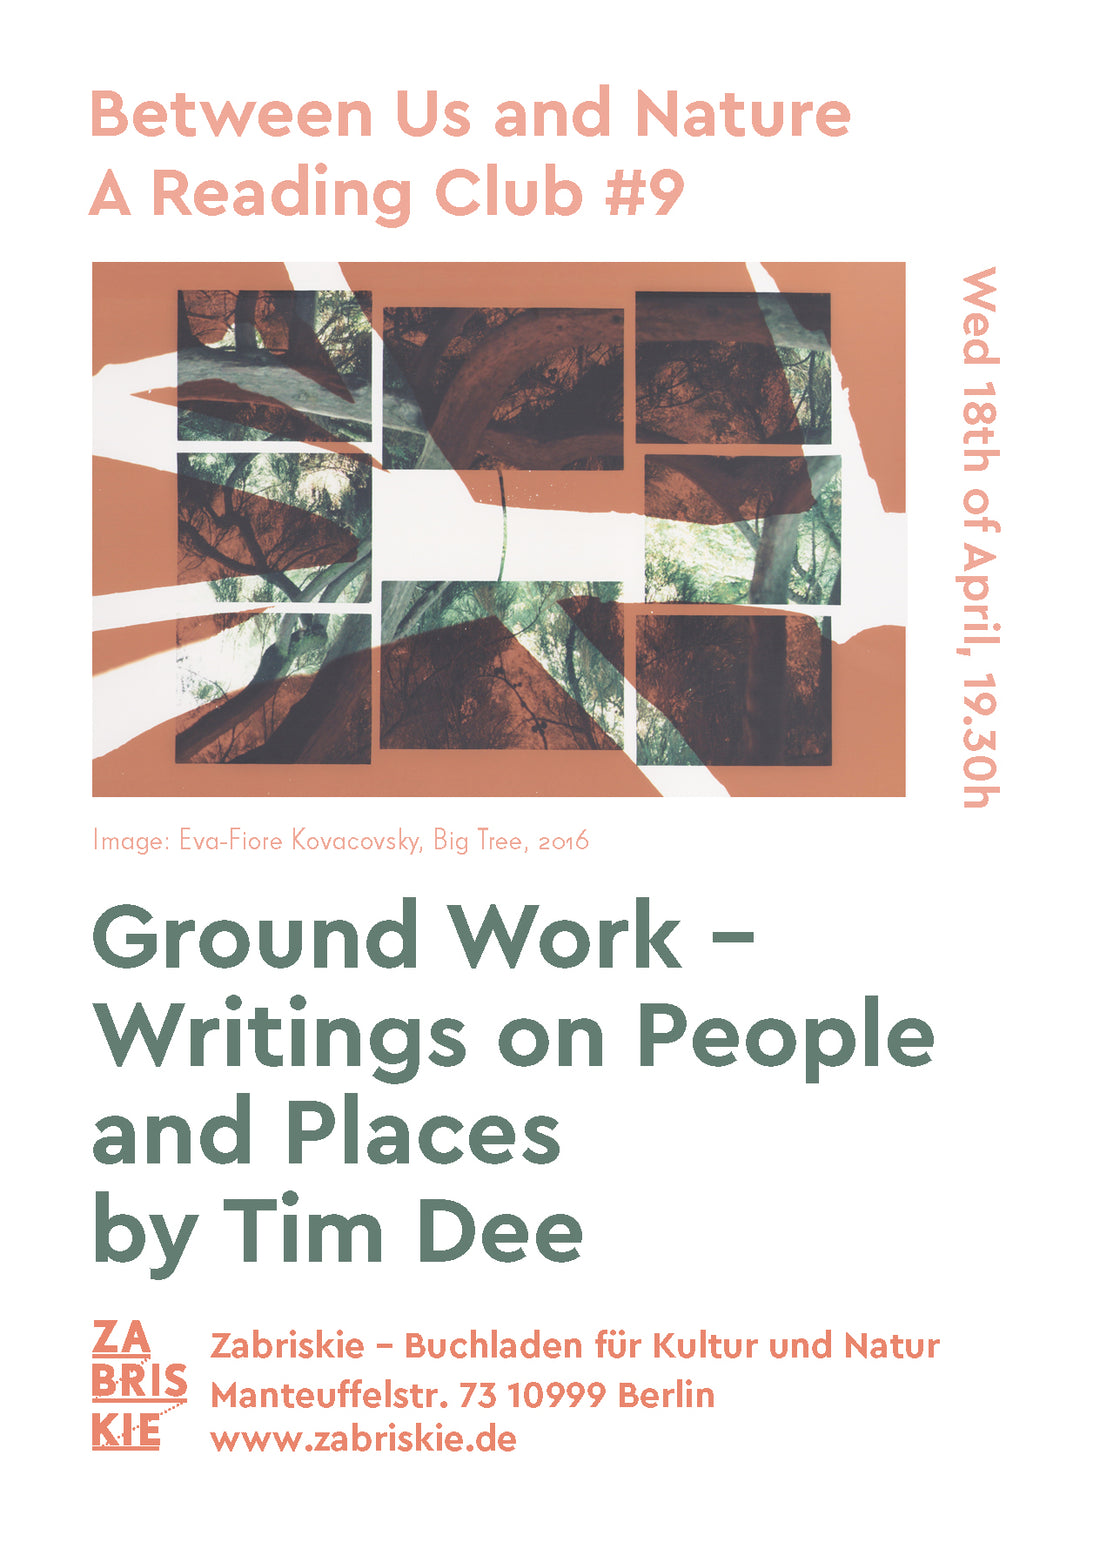 Between Us and Nature – A Reading Club #9: Ground Work – Writings on People and Places by Tim Dee